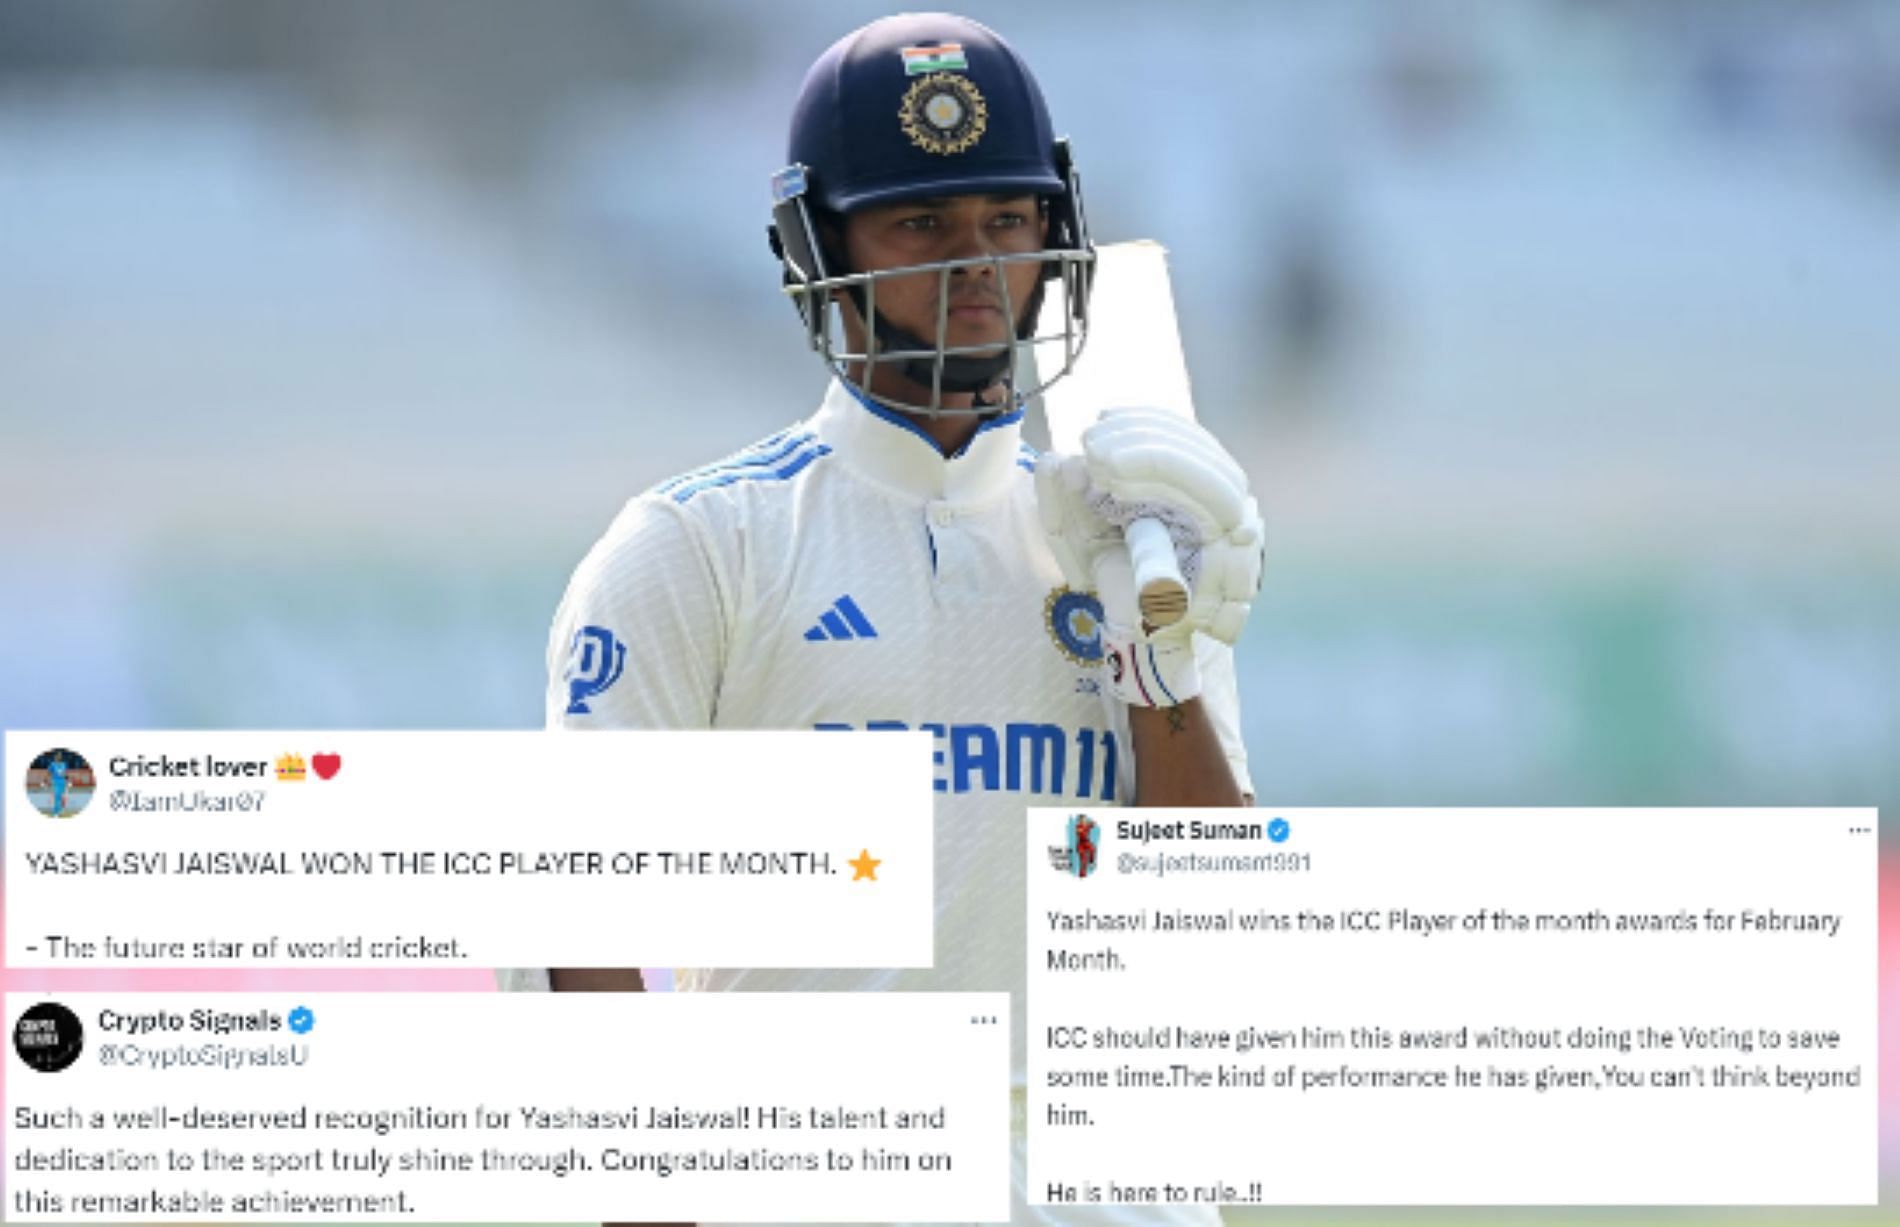 Jaiswal enjoyed a record-breaking Test series against England